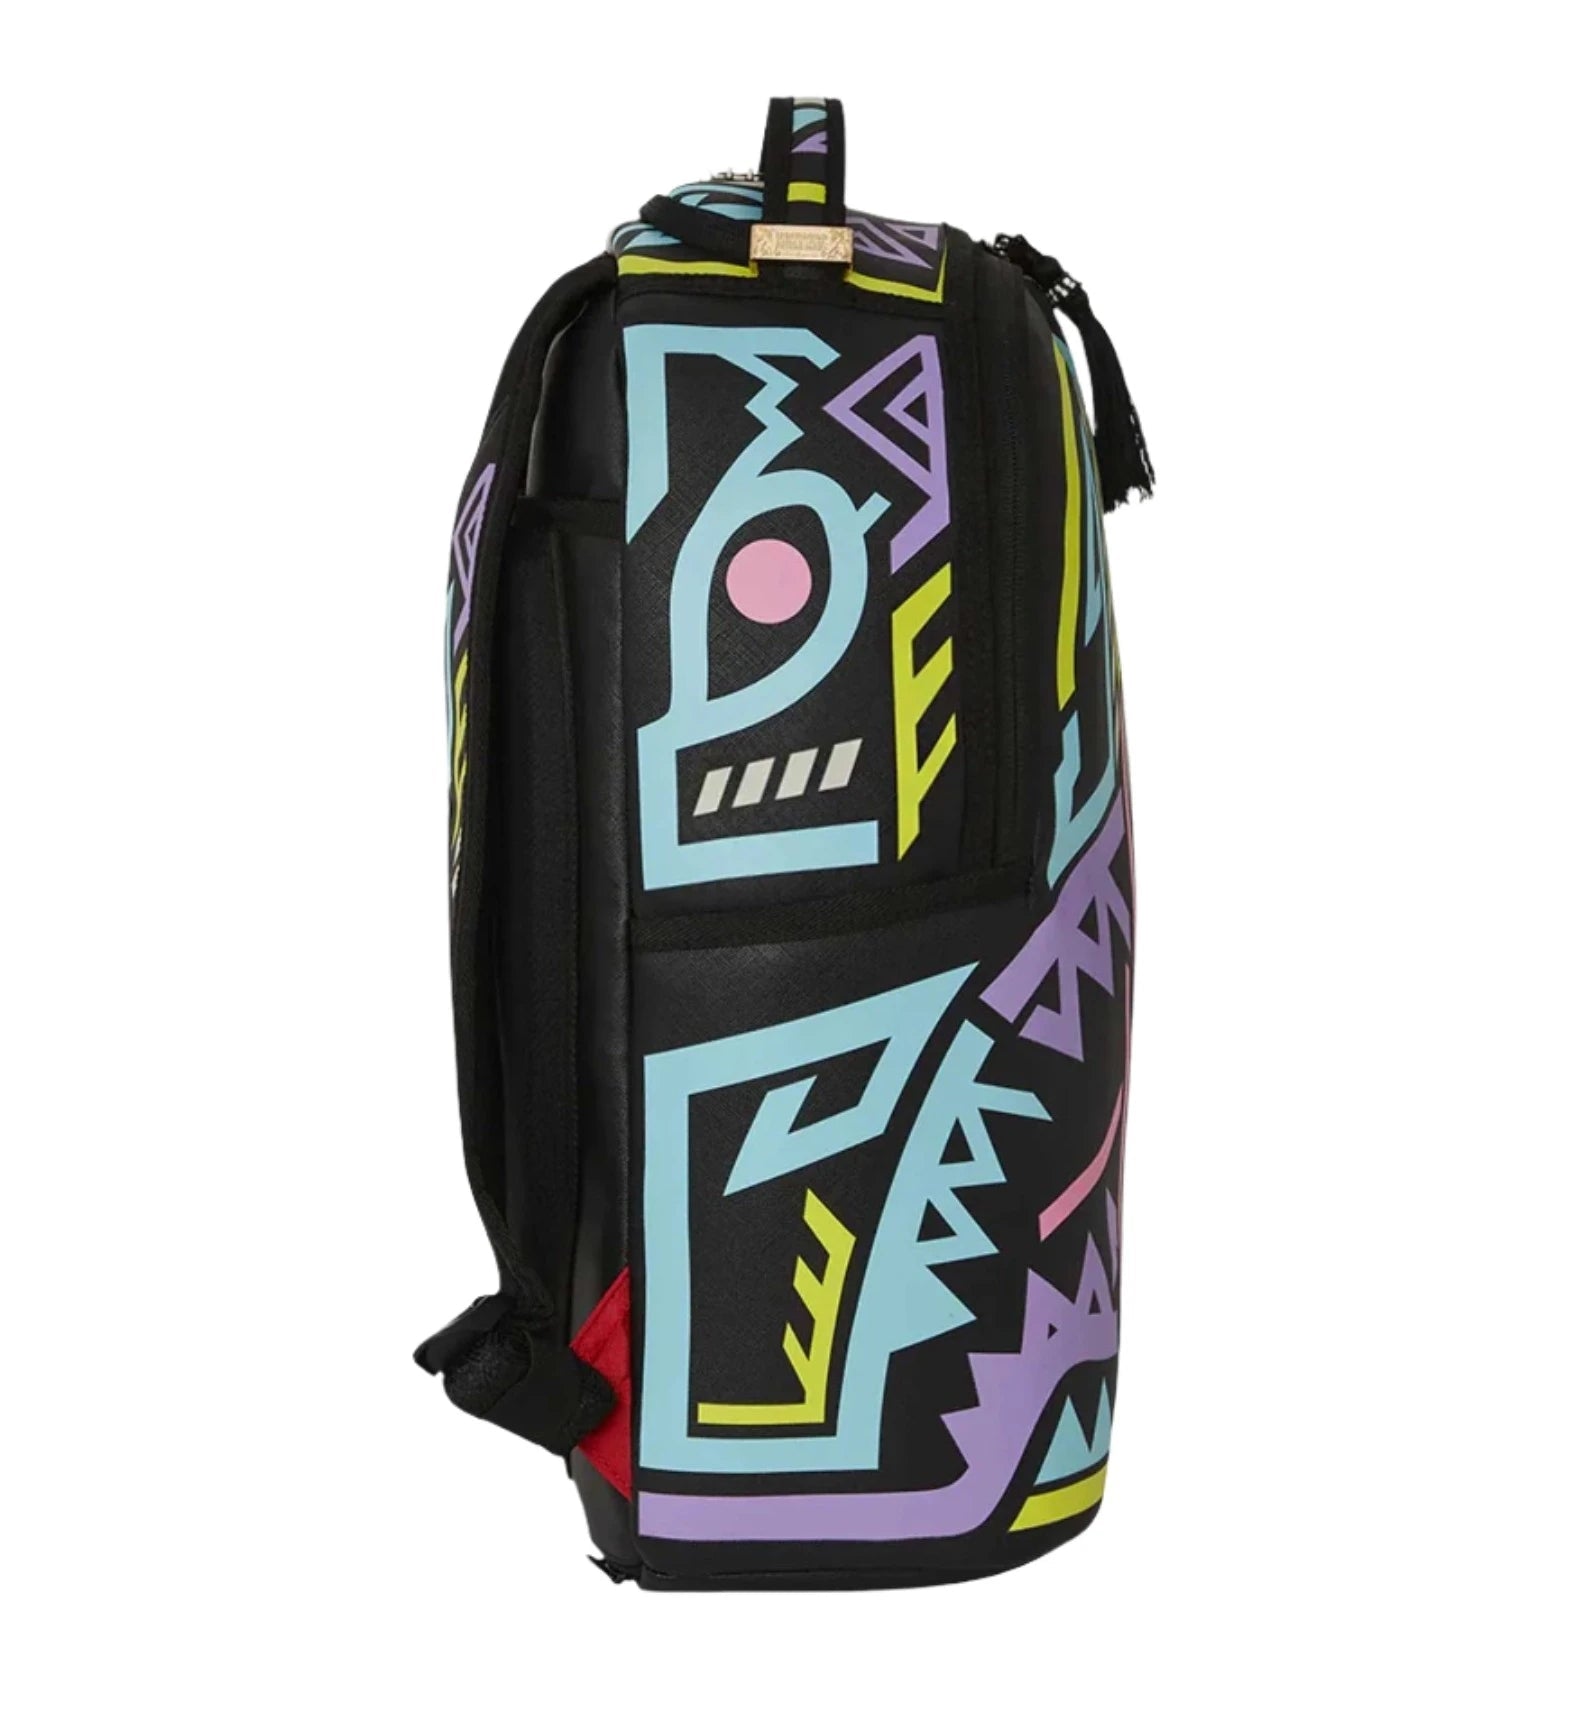 Sprayground Path To The Future Backpack - OnSize